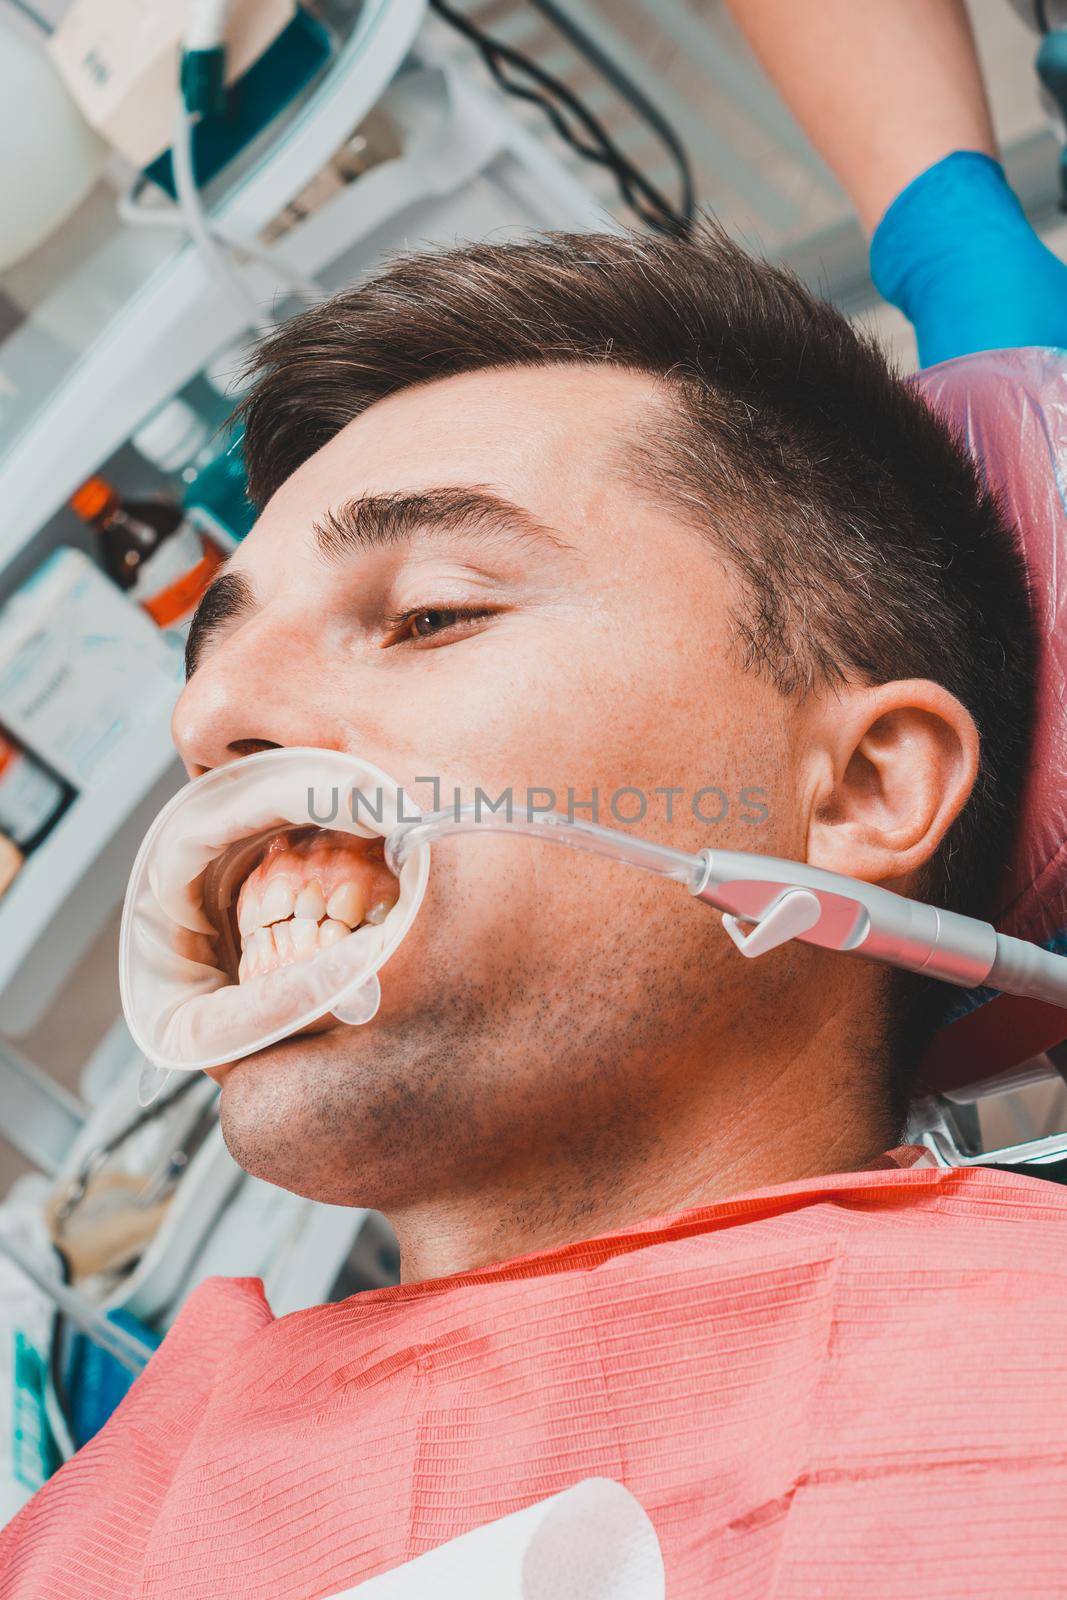 The procedure at the dentist,the dentist prepares the patient and tools to remove tartar, saliva ejector and retractor in the patient's mouth. by Niko_Cingaryuk